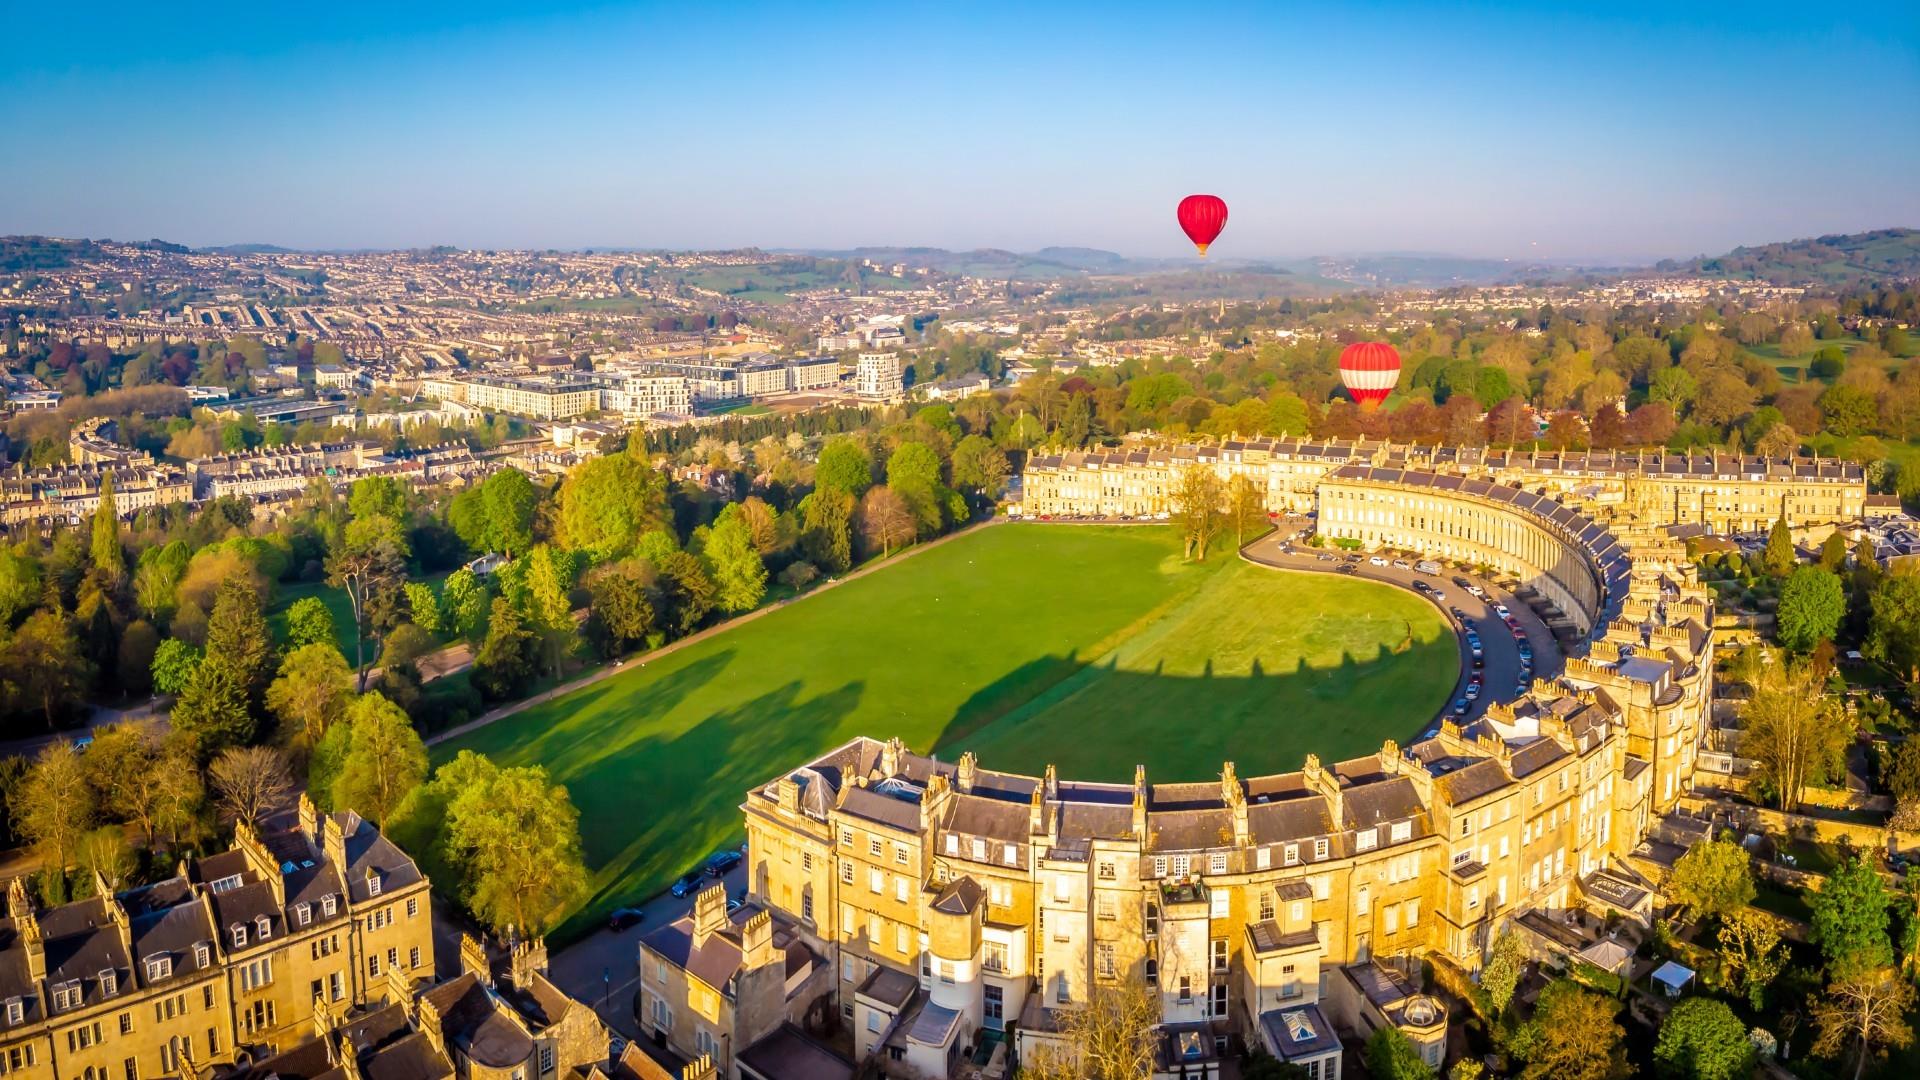 Royal Crescent Aerial View with Balloon